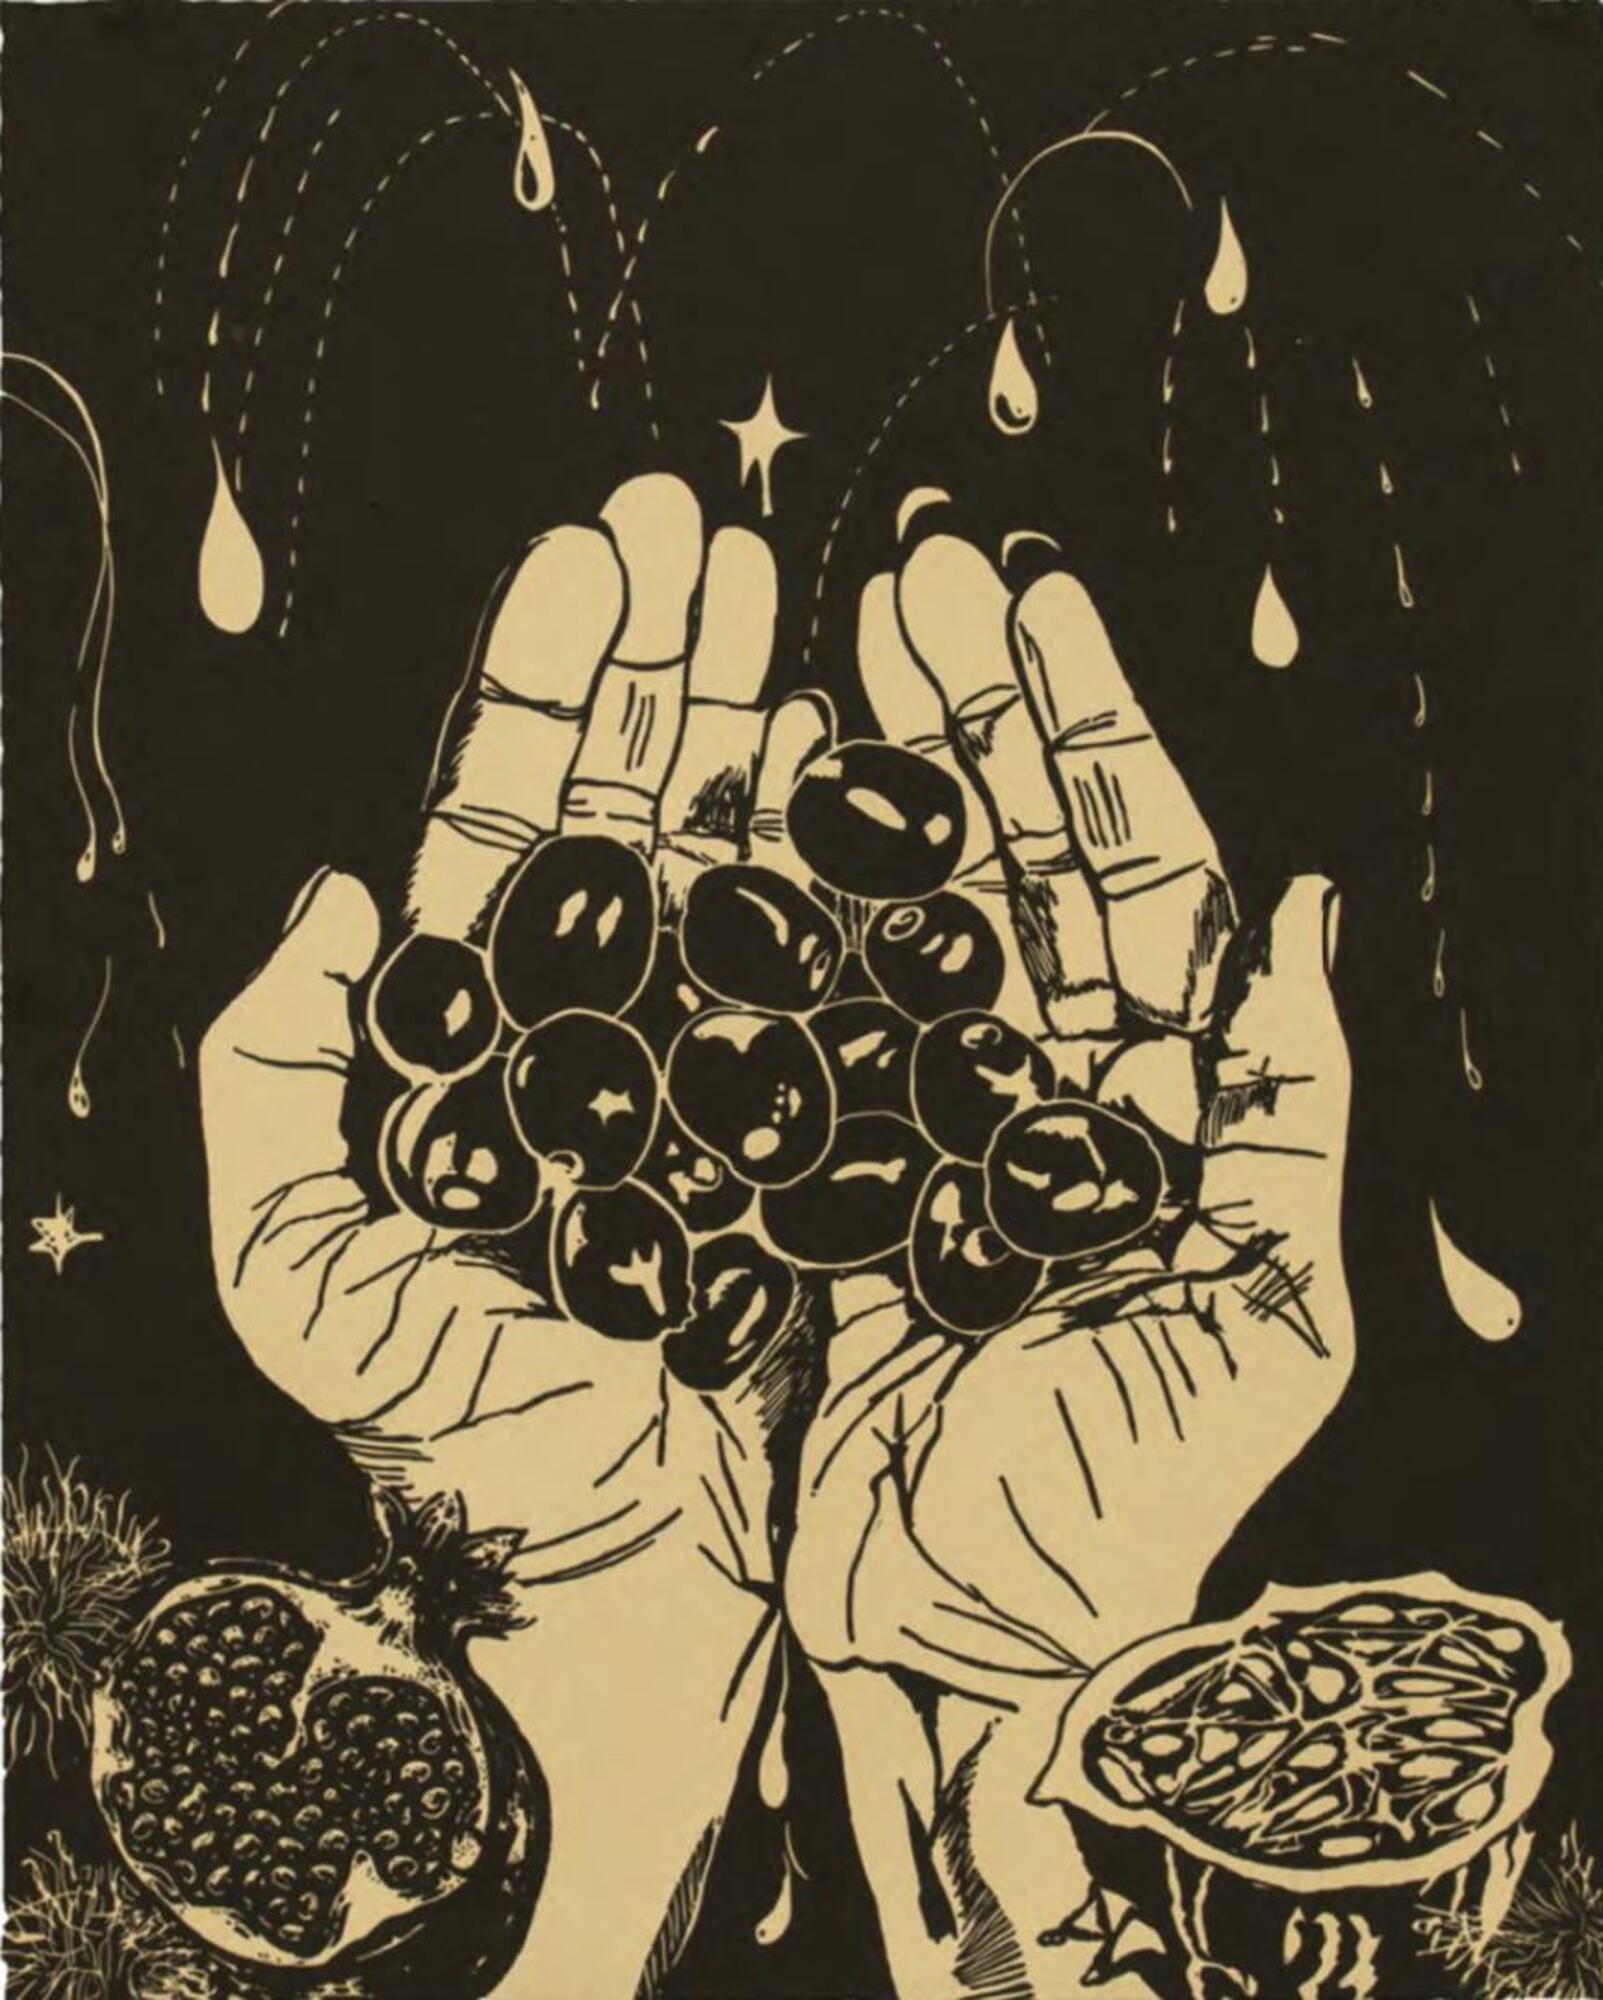 No. 9 of a series of 27 prints. A simple, two-tone palette.&nbsp; A pair of cupped hands holds several cherry-sized objects while a few water droplets spew in the background. In the lower-left corner there is a bisected pomegranate. In the lower-right corner there is a bisected Kiwano melon.<br />
Sultana&#39;s Dream was printed and published by Durham Press in 2018.